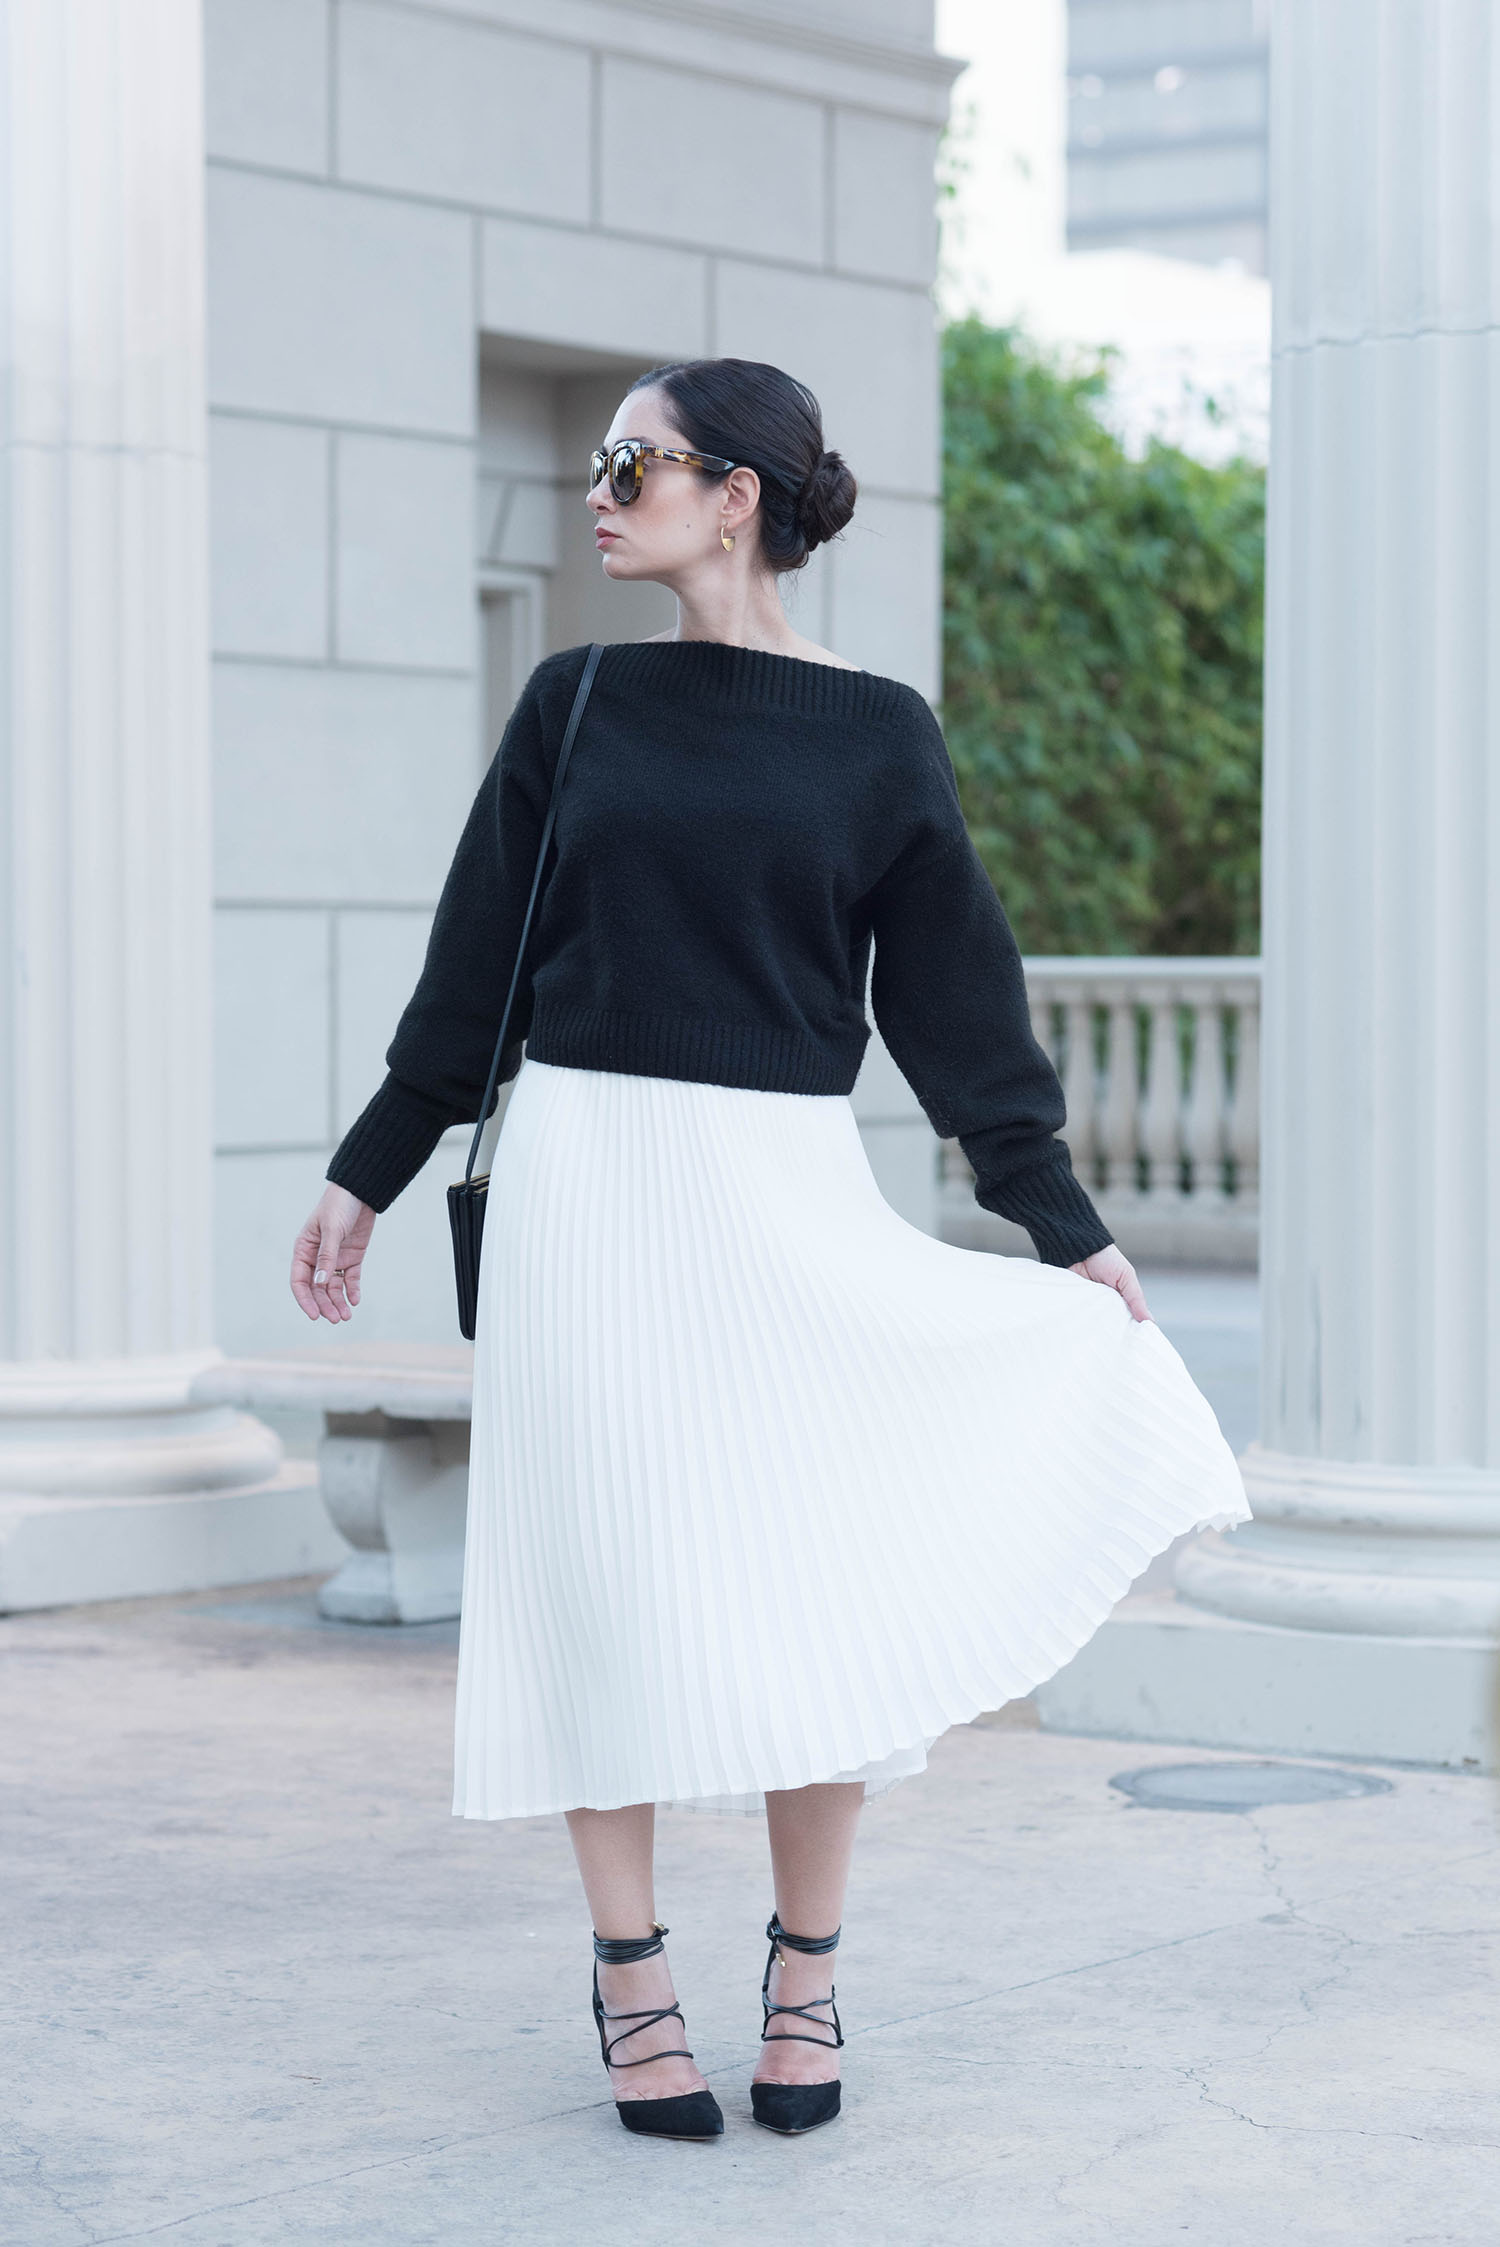 Fashion blogger Cee Fardoe of Coco & Vera at Caesar's Palace in Las Vegas wearing a white pleated Aritzia accurst and Sam Edelman lace-up heels